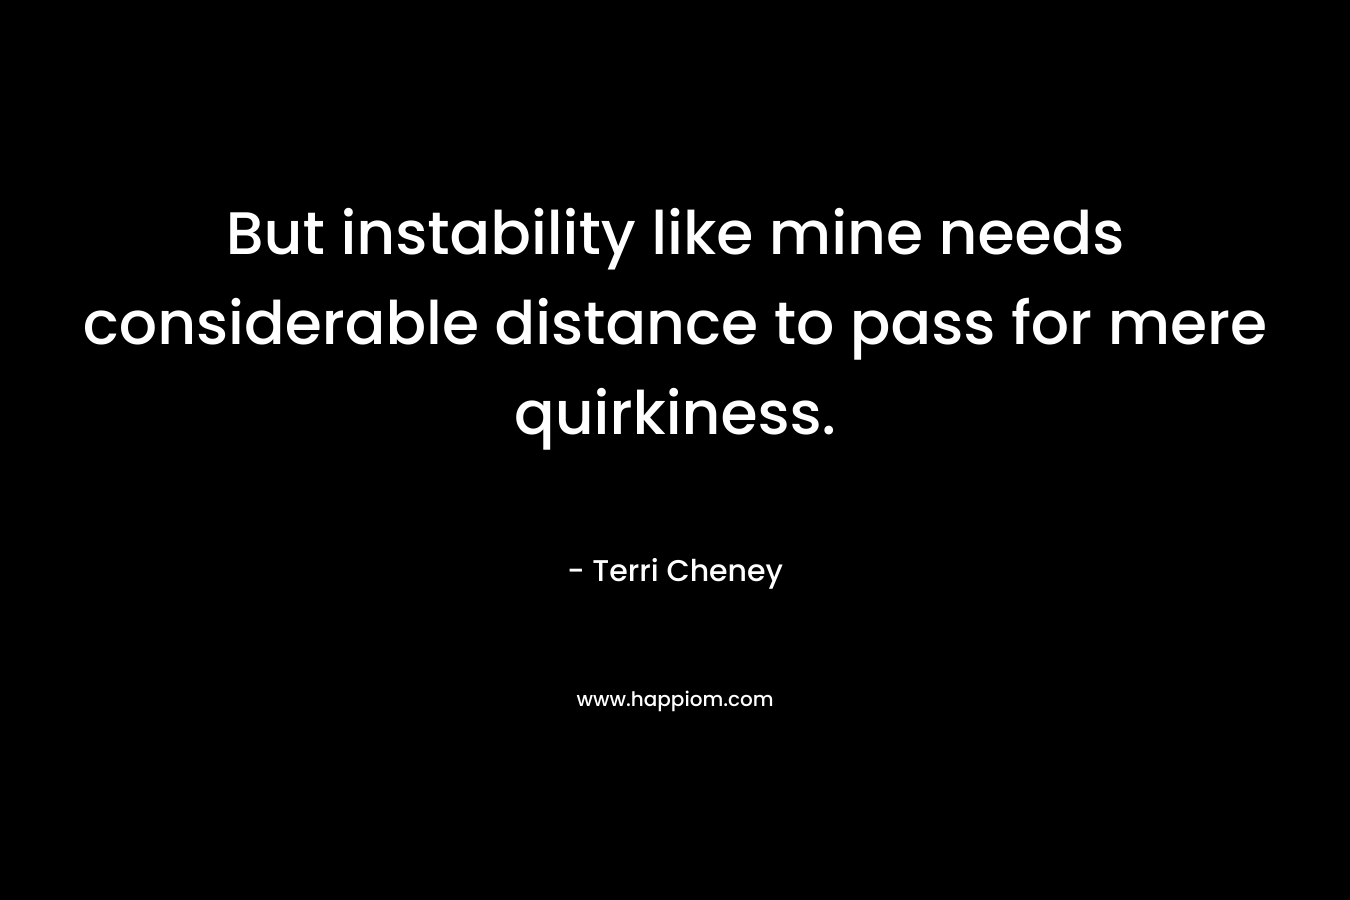 But instability like mine needs considerable distance to pass for mere quirkiness.